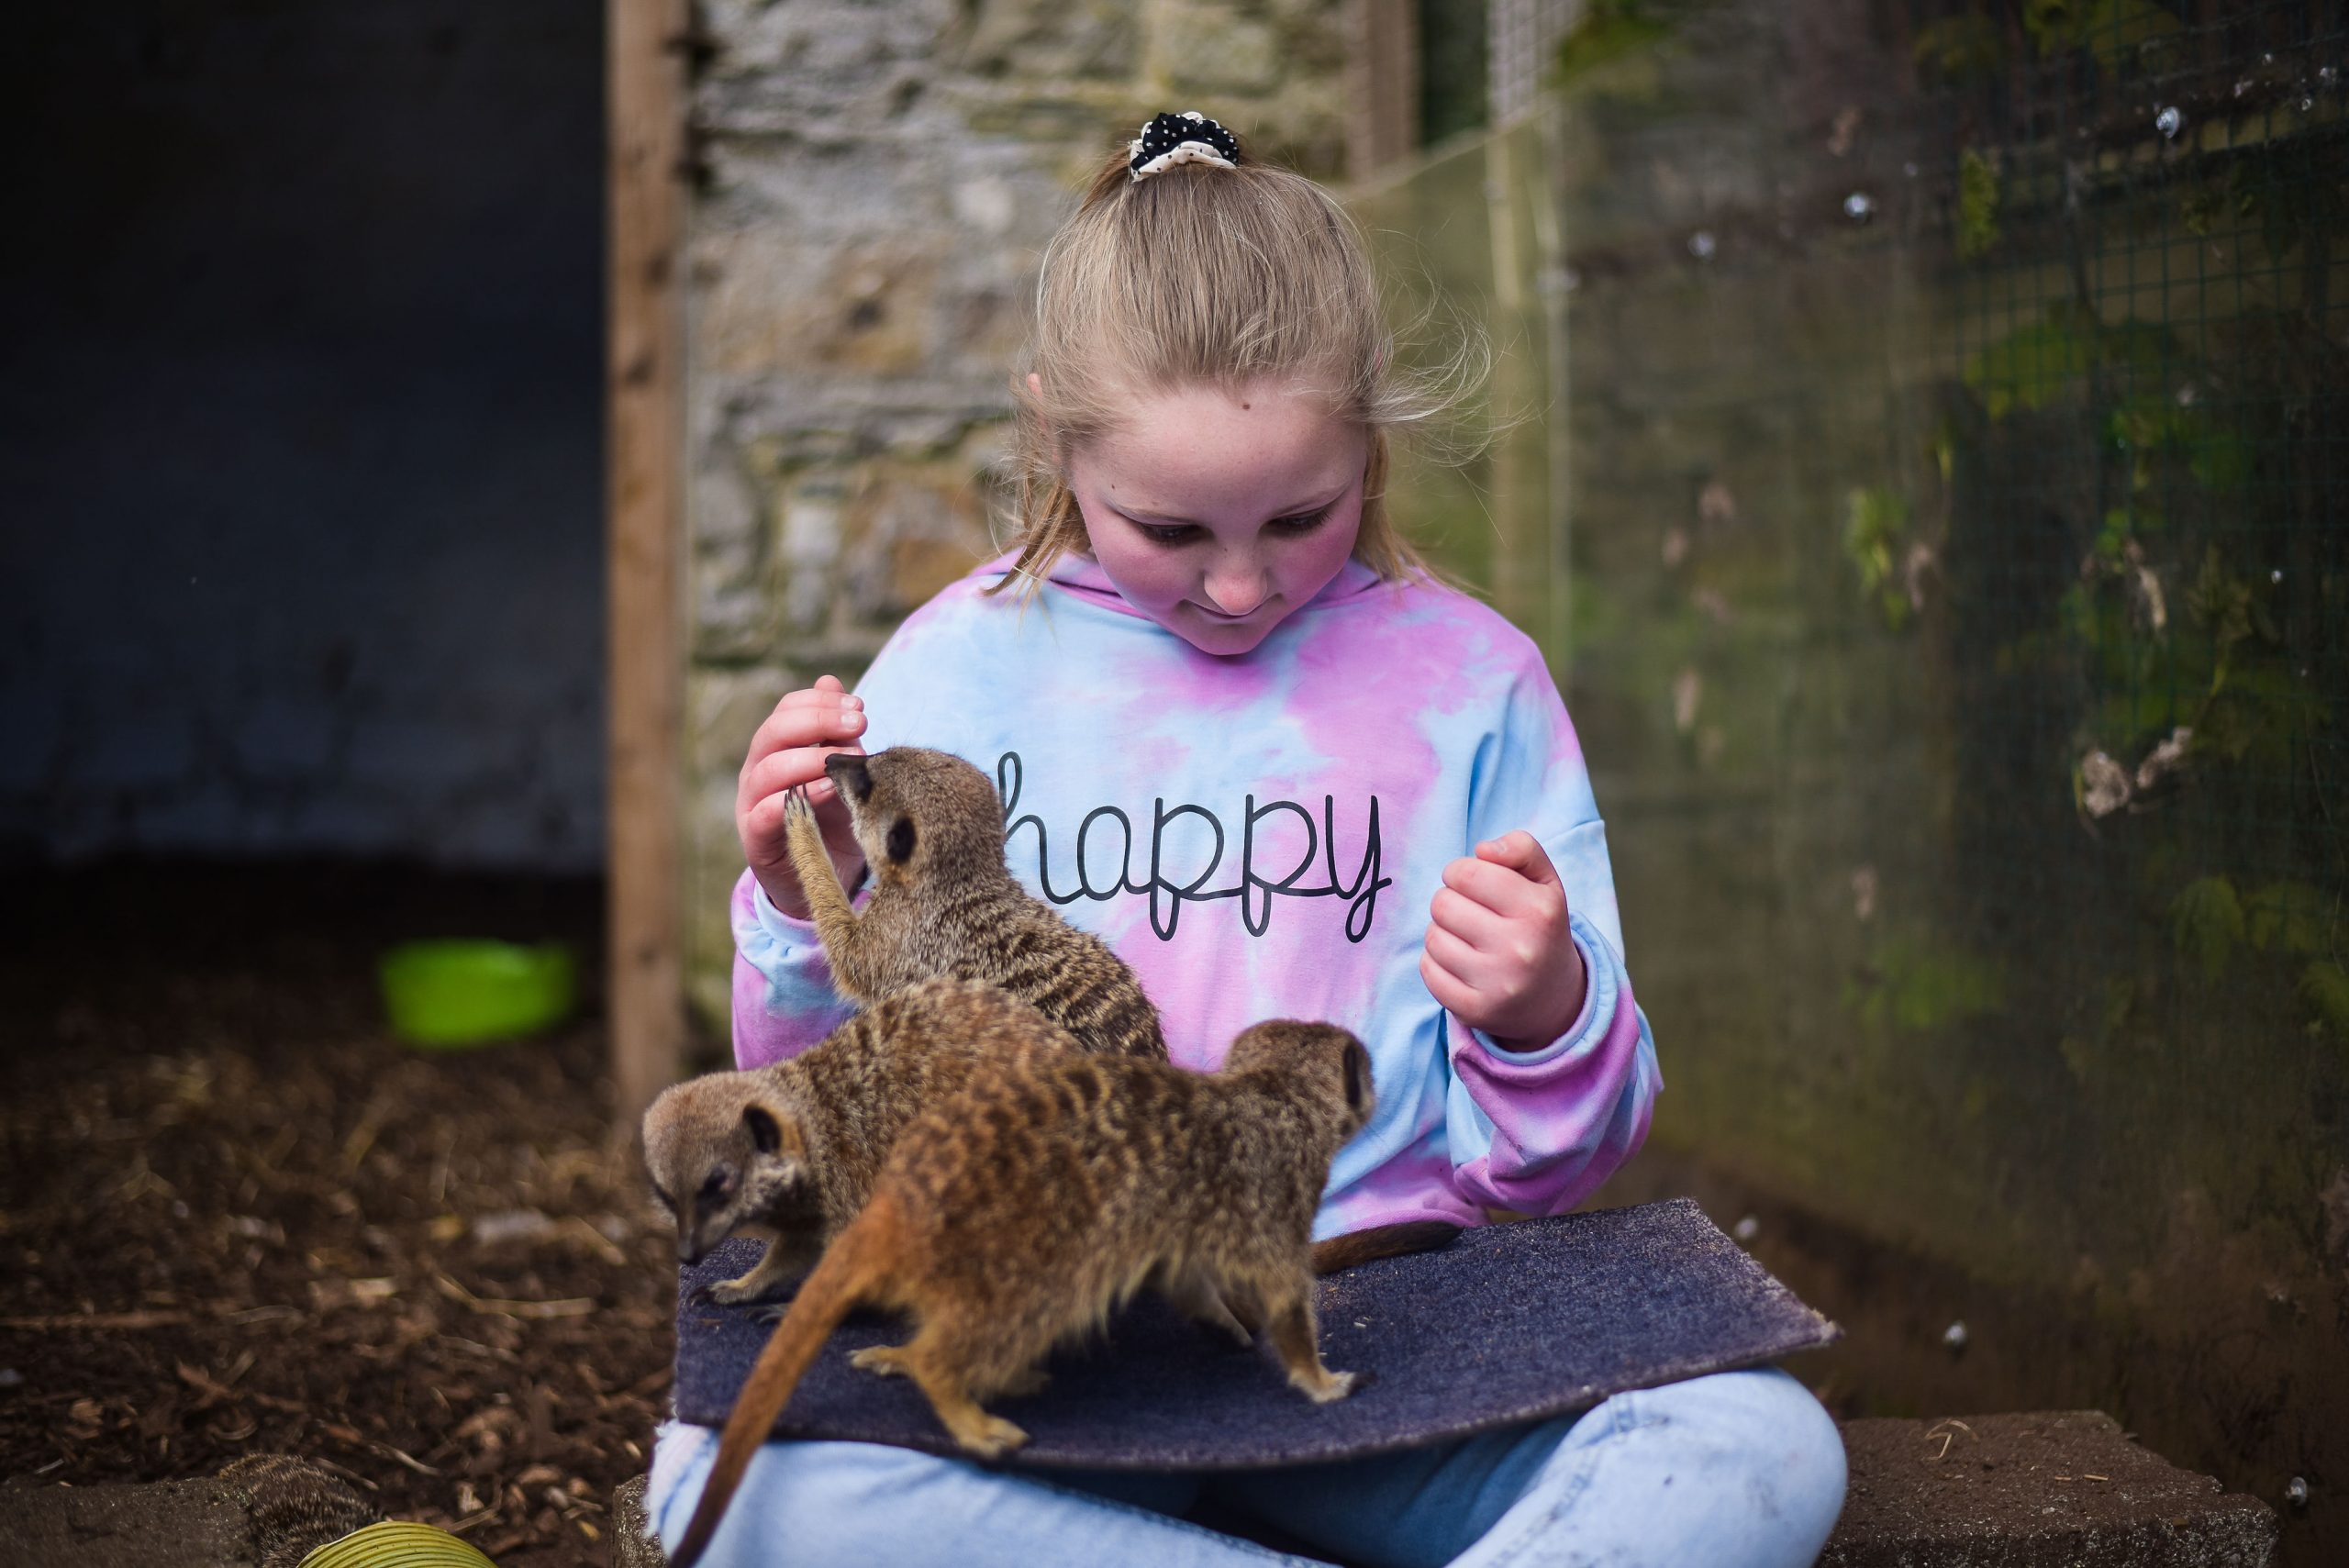 Little girl sitting down with baby meerkats on her lap